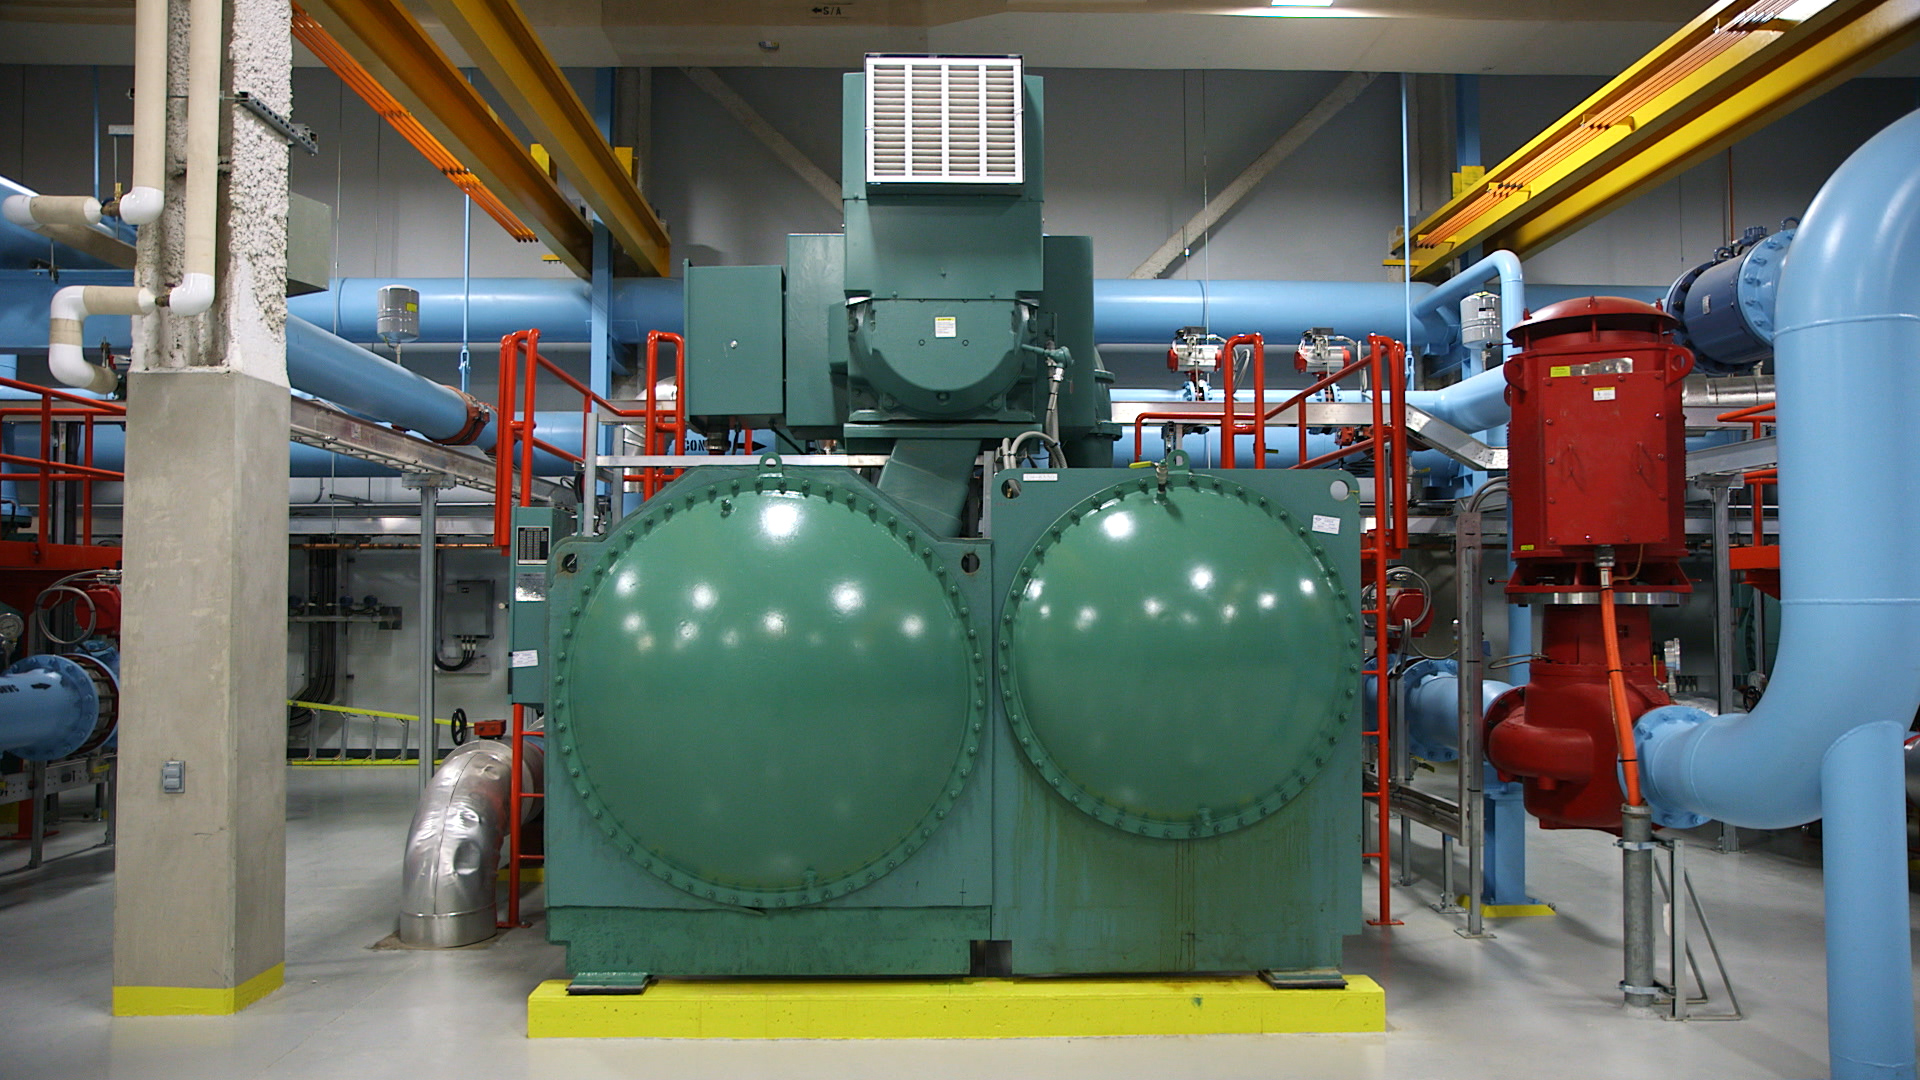 Interior shot of the Utilities cooling systems